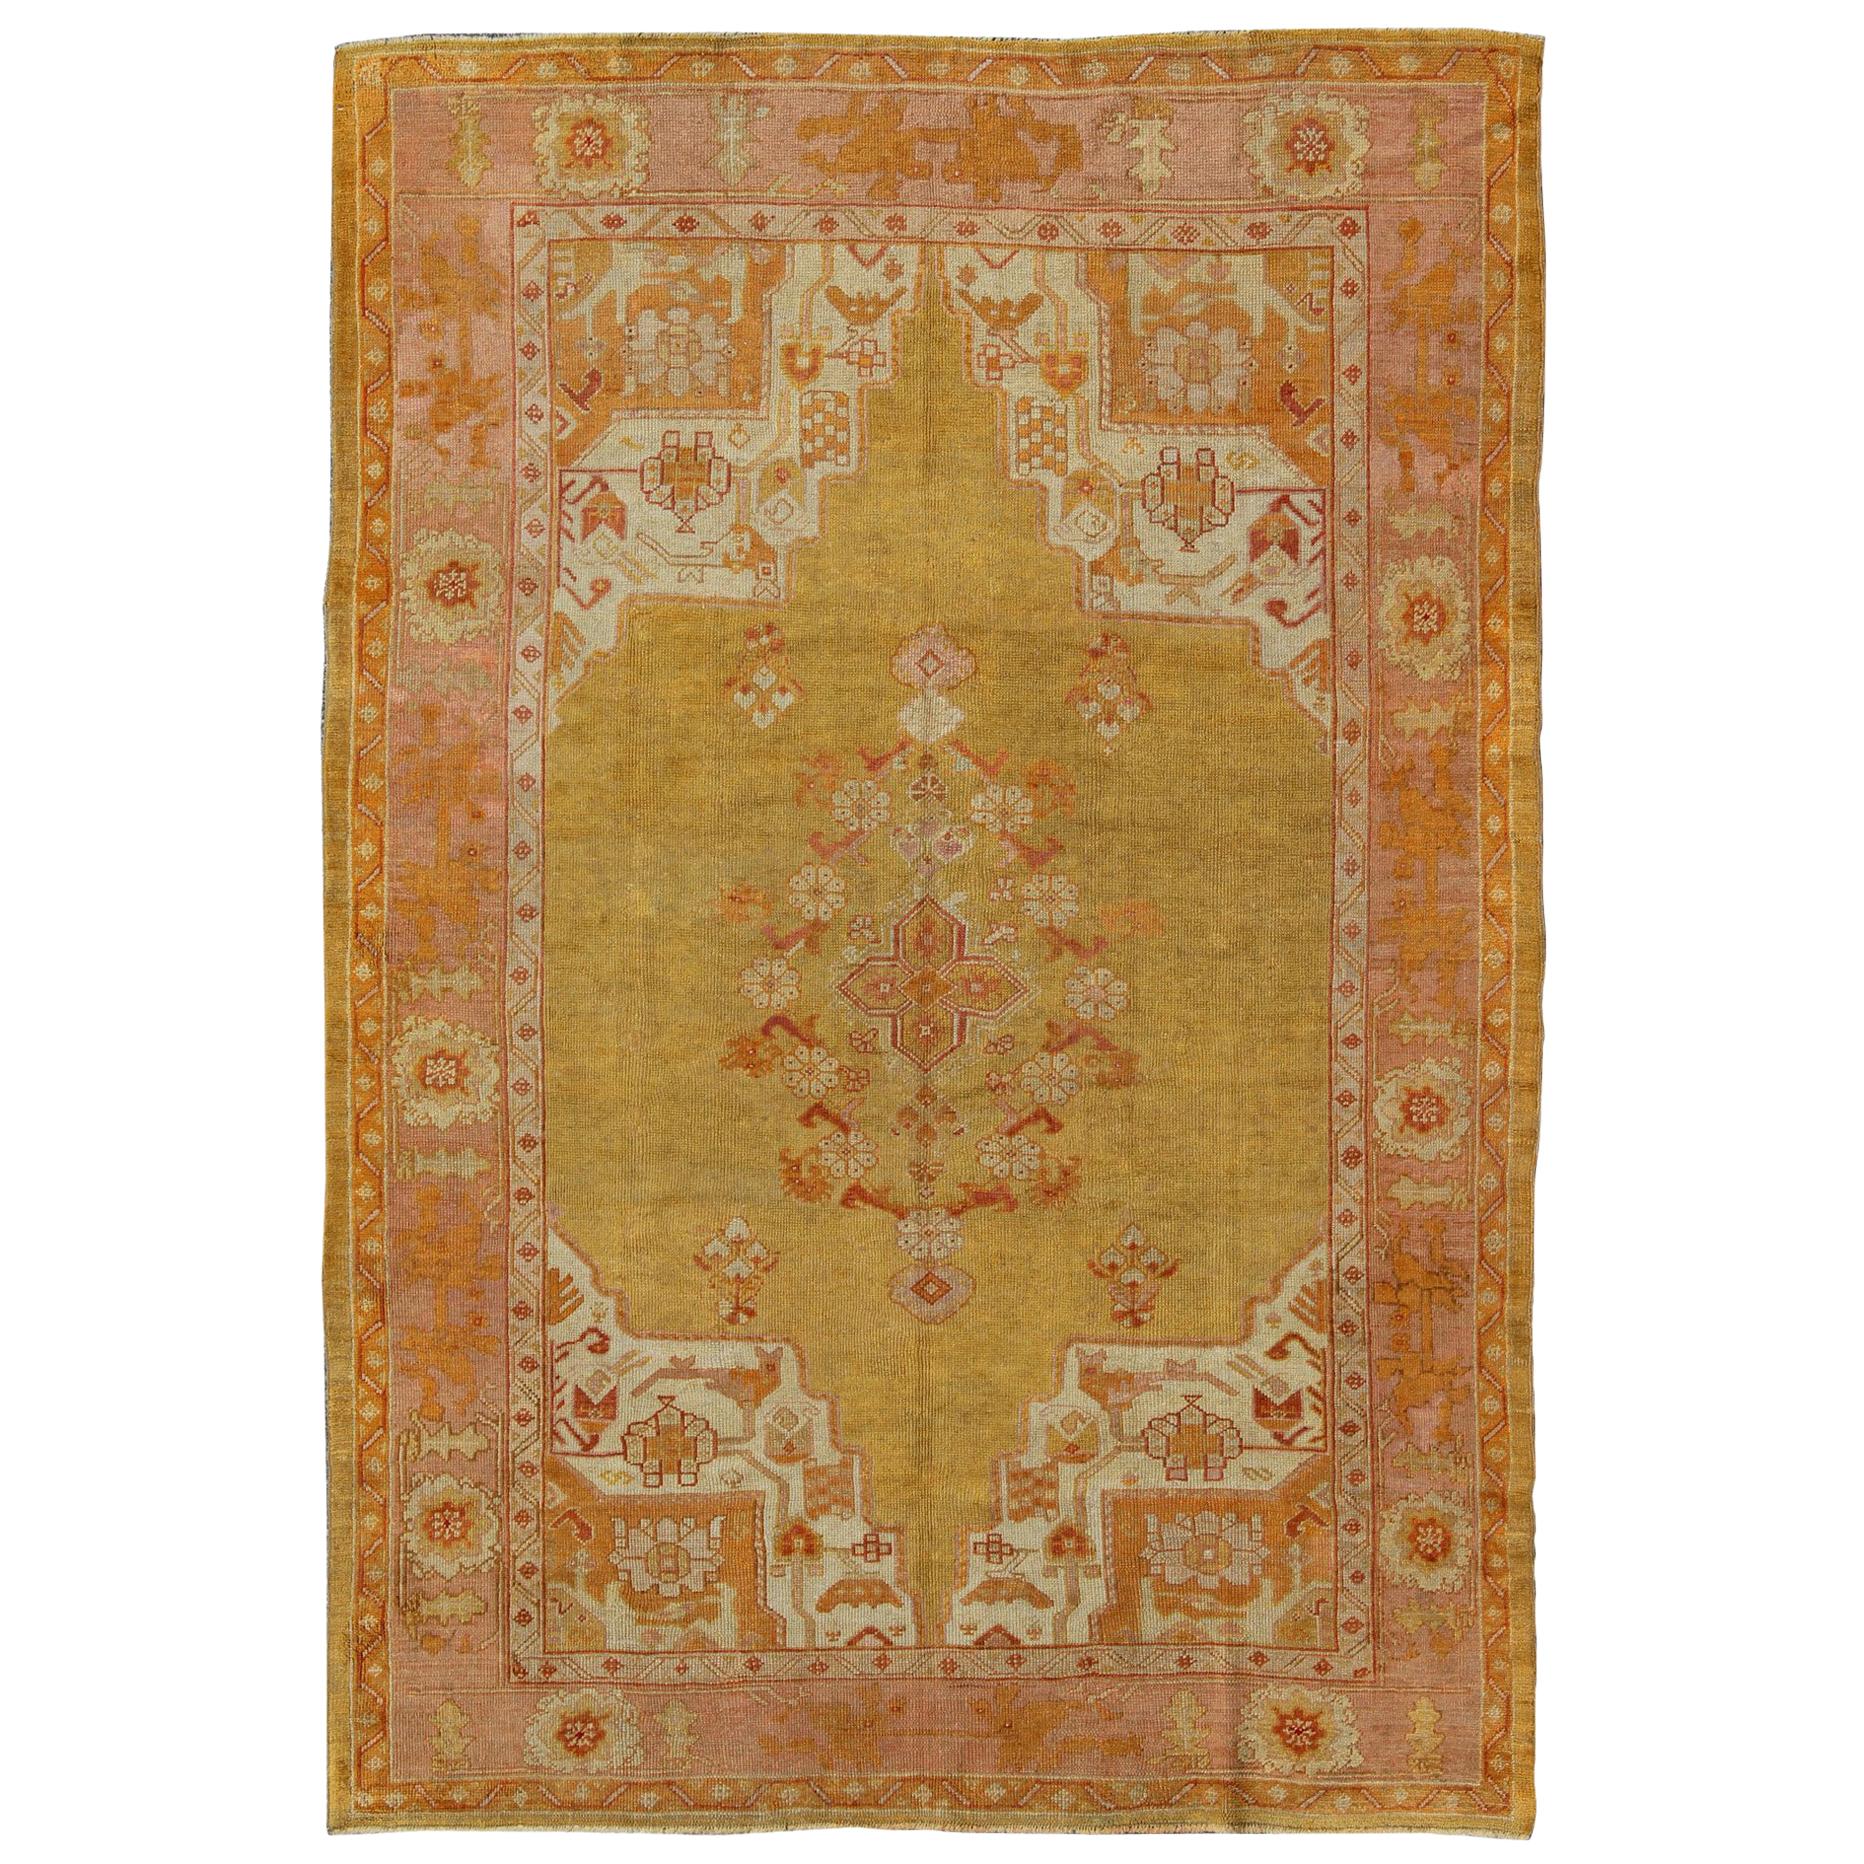 Antique Oushak Rug in Yellow Green Background, Pink Border, Red & Orange Accents For Sale